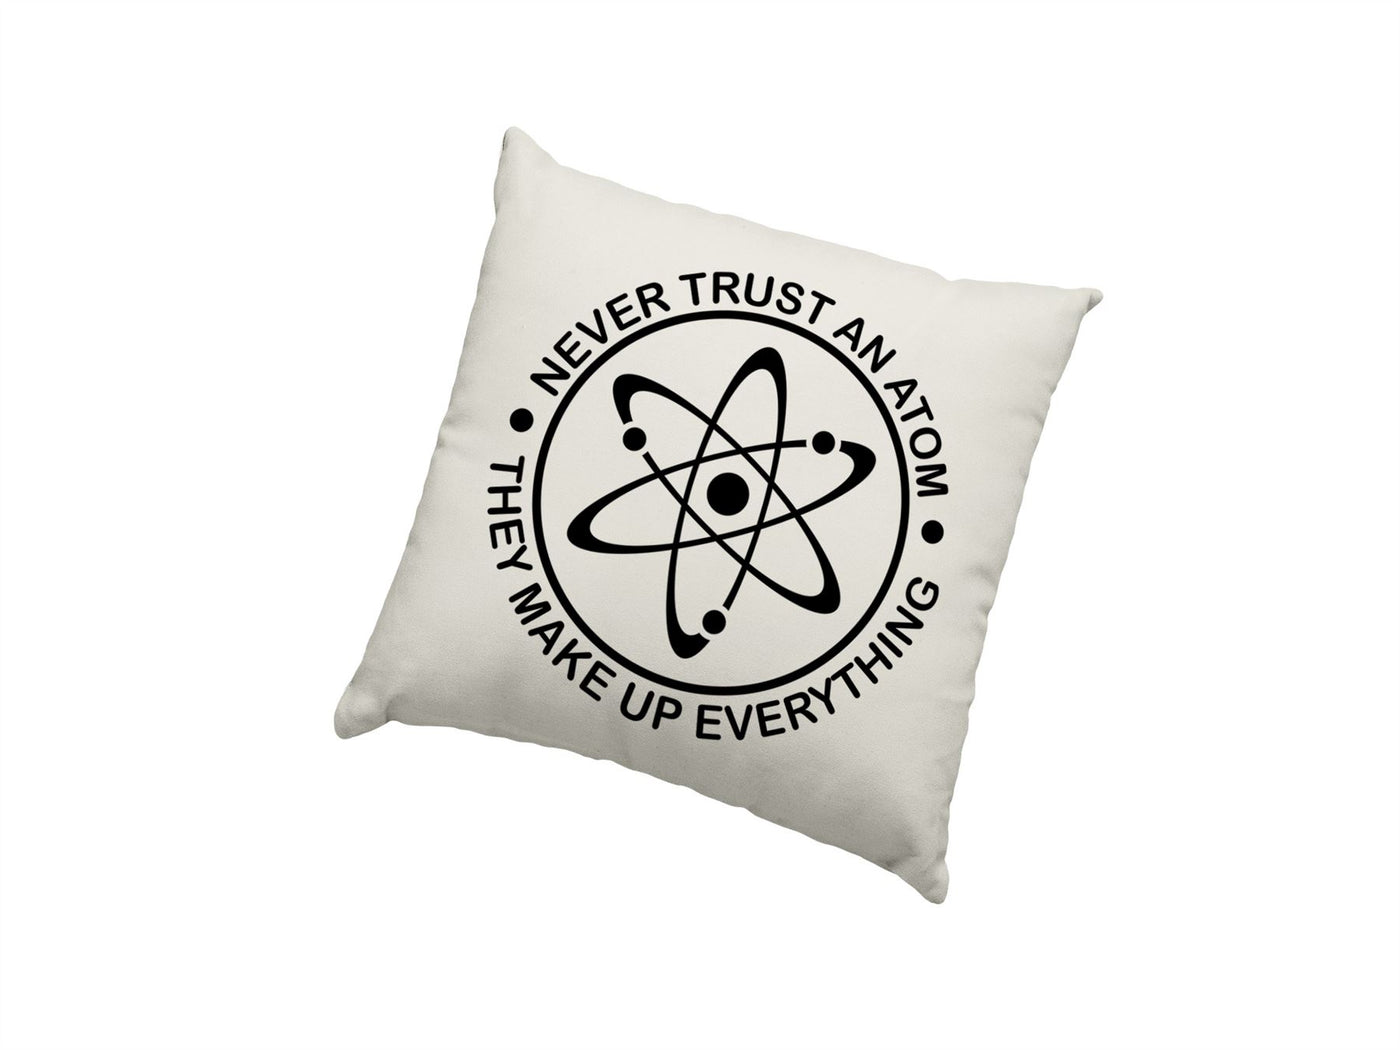 Never Trust an Atom, They Make up Everything Cushion Cover - Science Physics